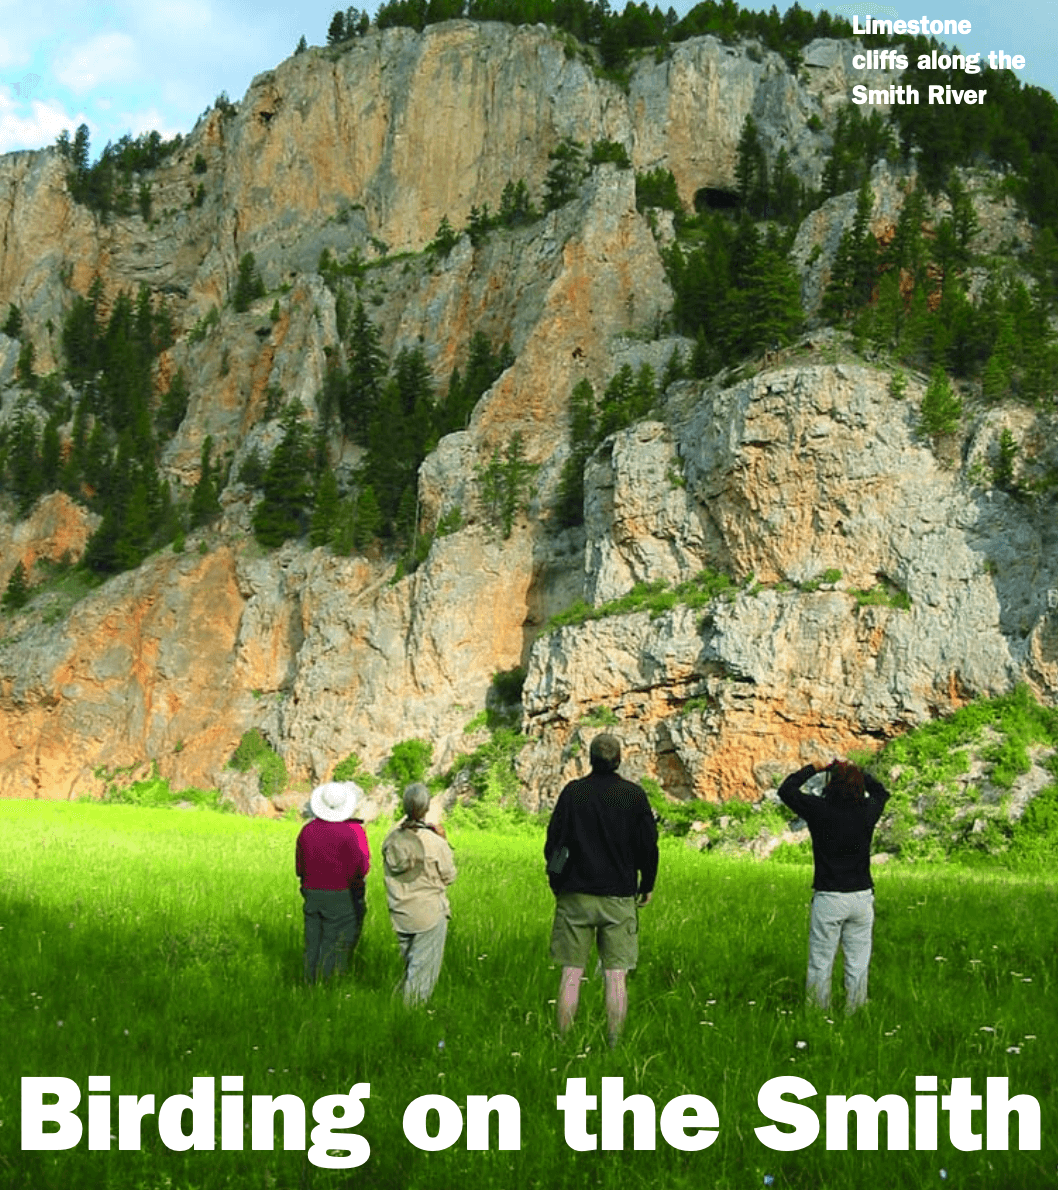 four travelers standing in a grassy meadow looking up at tall limestone cliffs along the Smith River